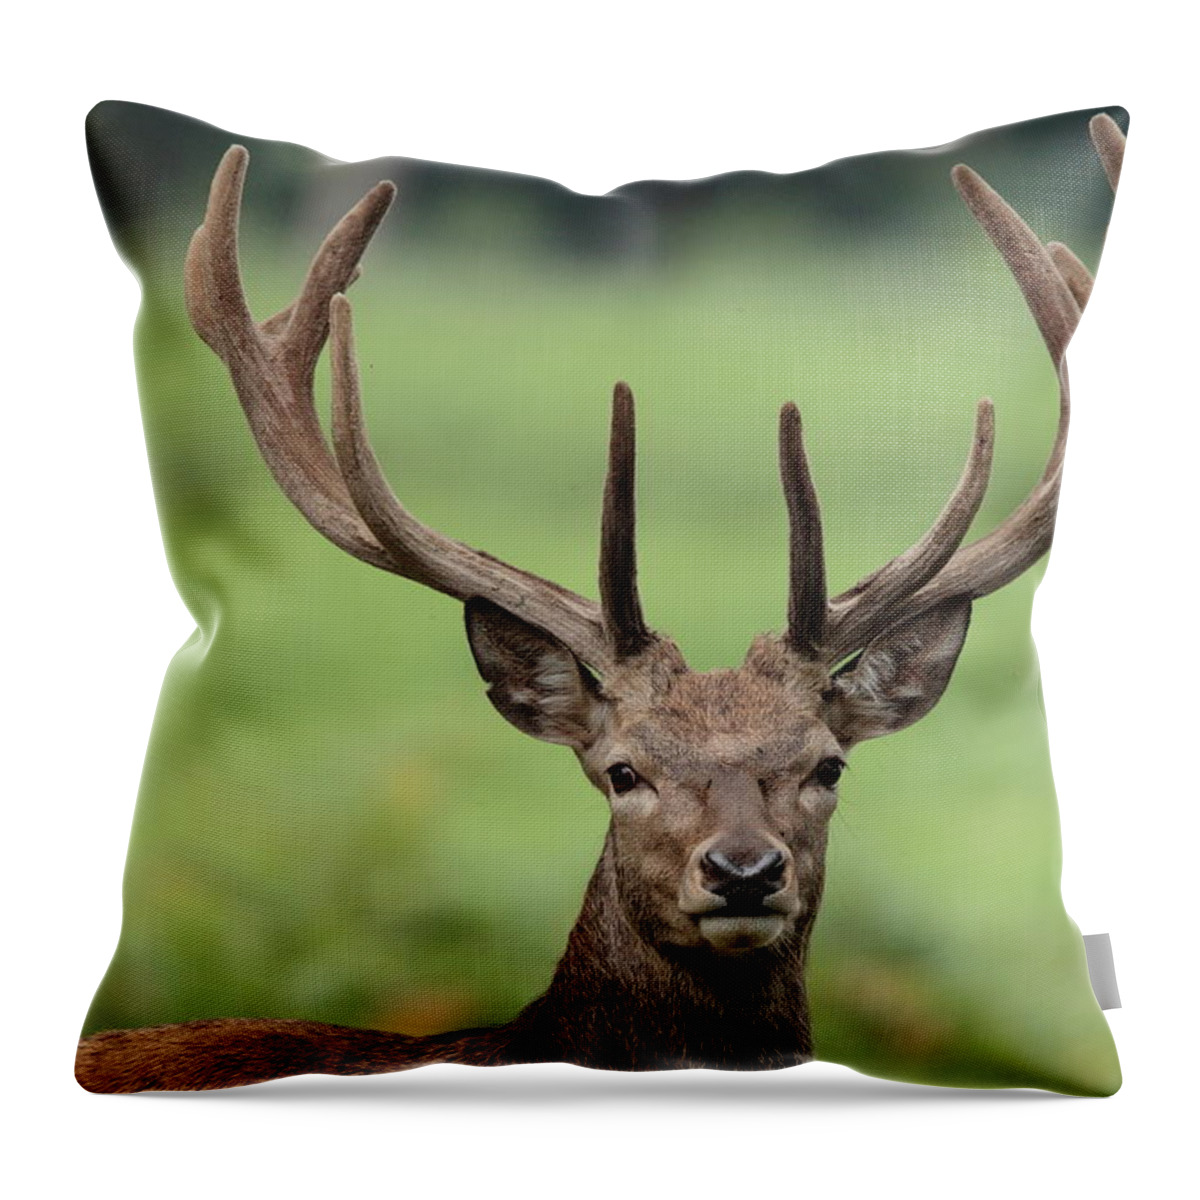 Animal Themes Throw Pillow featuring the photograph Young Red Deer Stag With Velvet Antler by Hammerchewer (g C Russell)